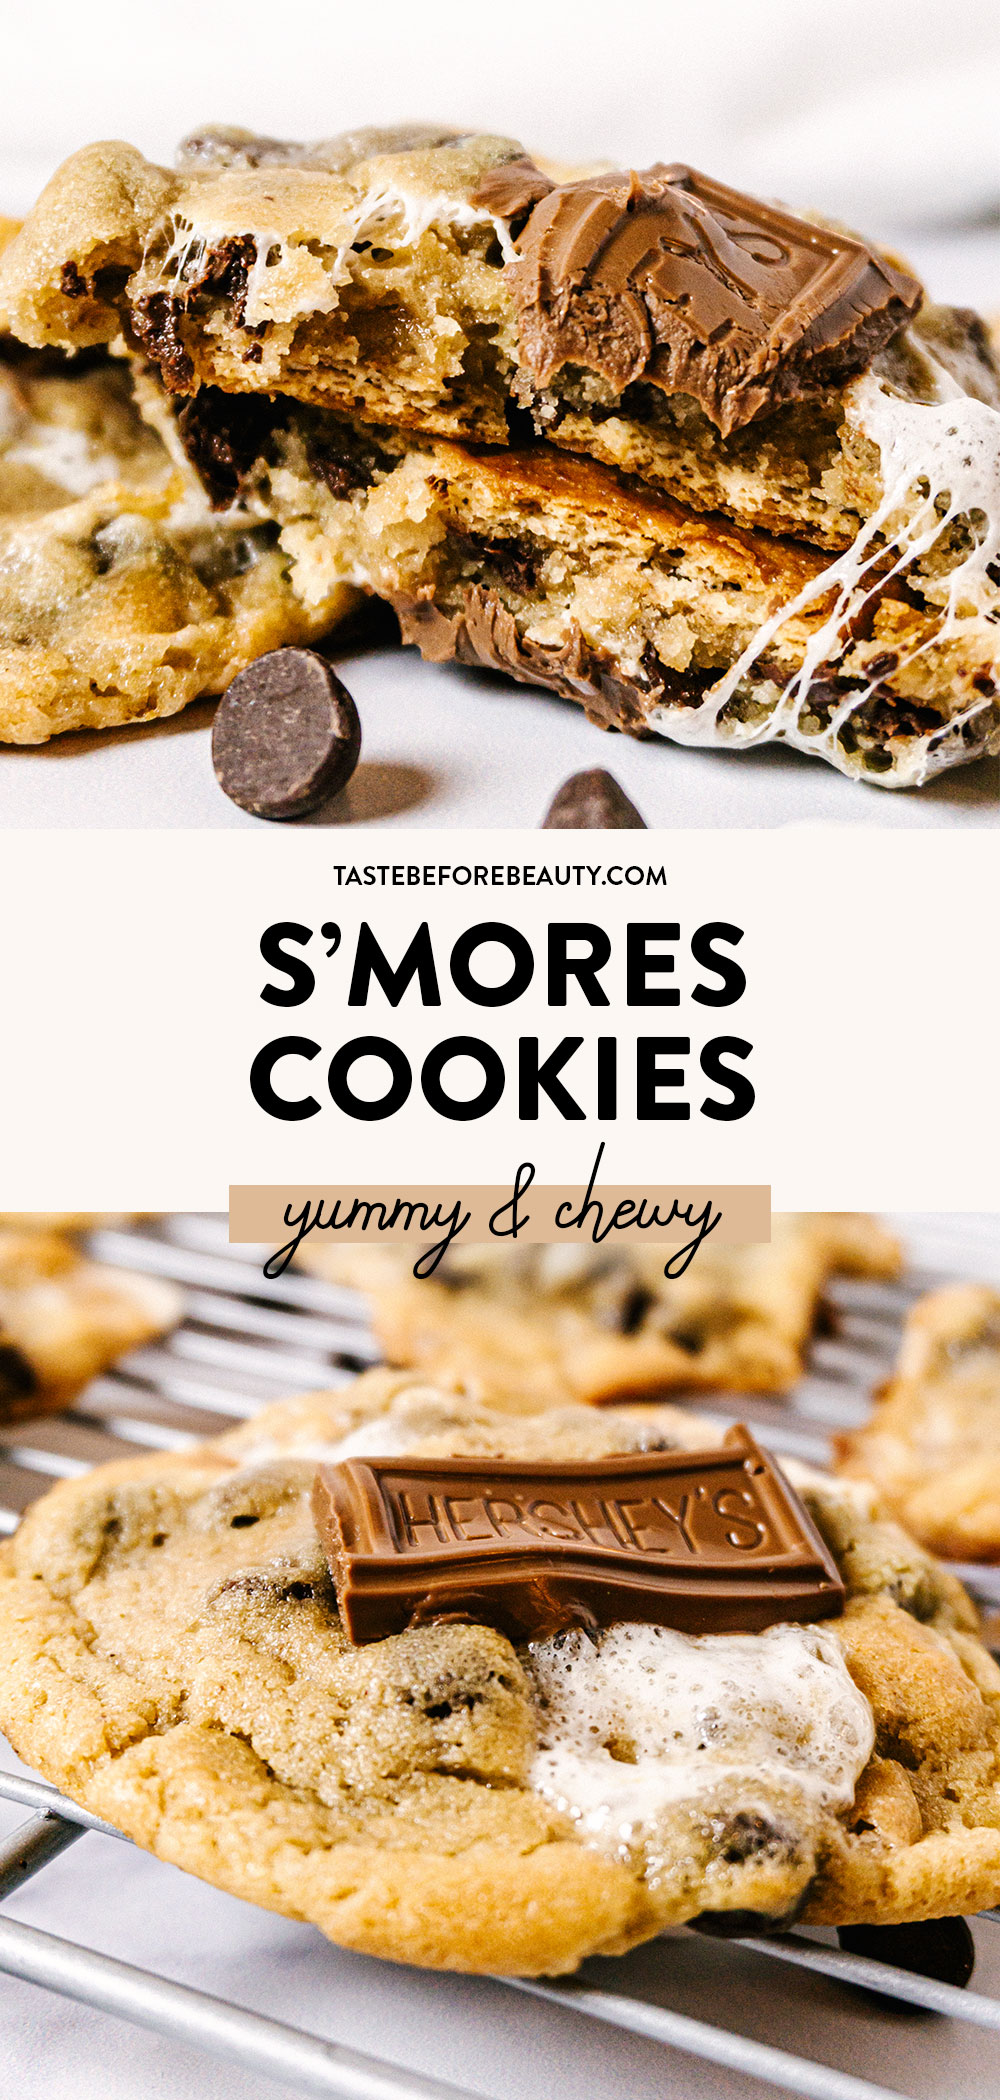 s'mores cookies pinterest pin